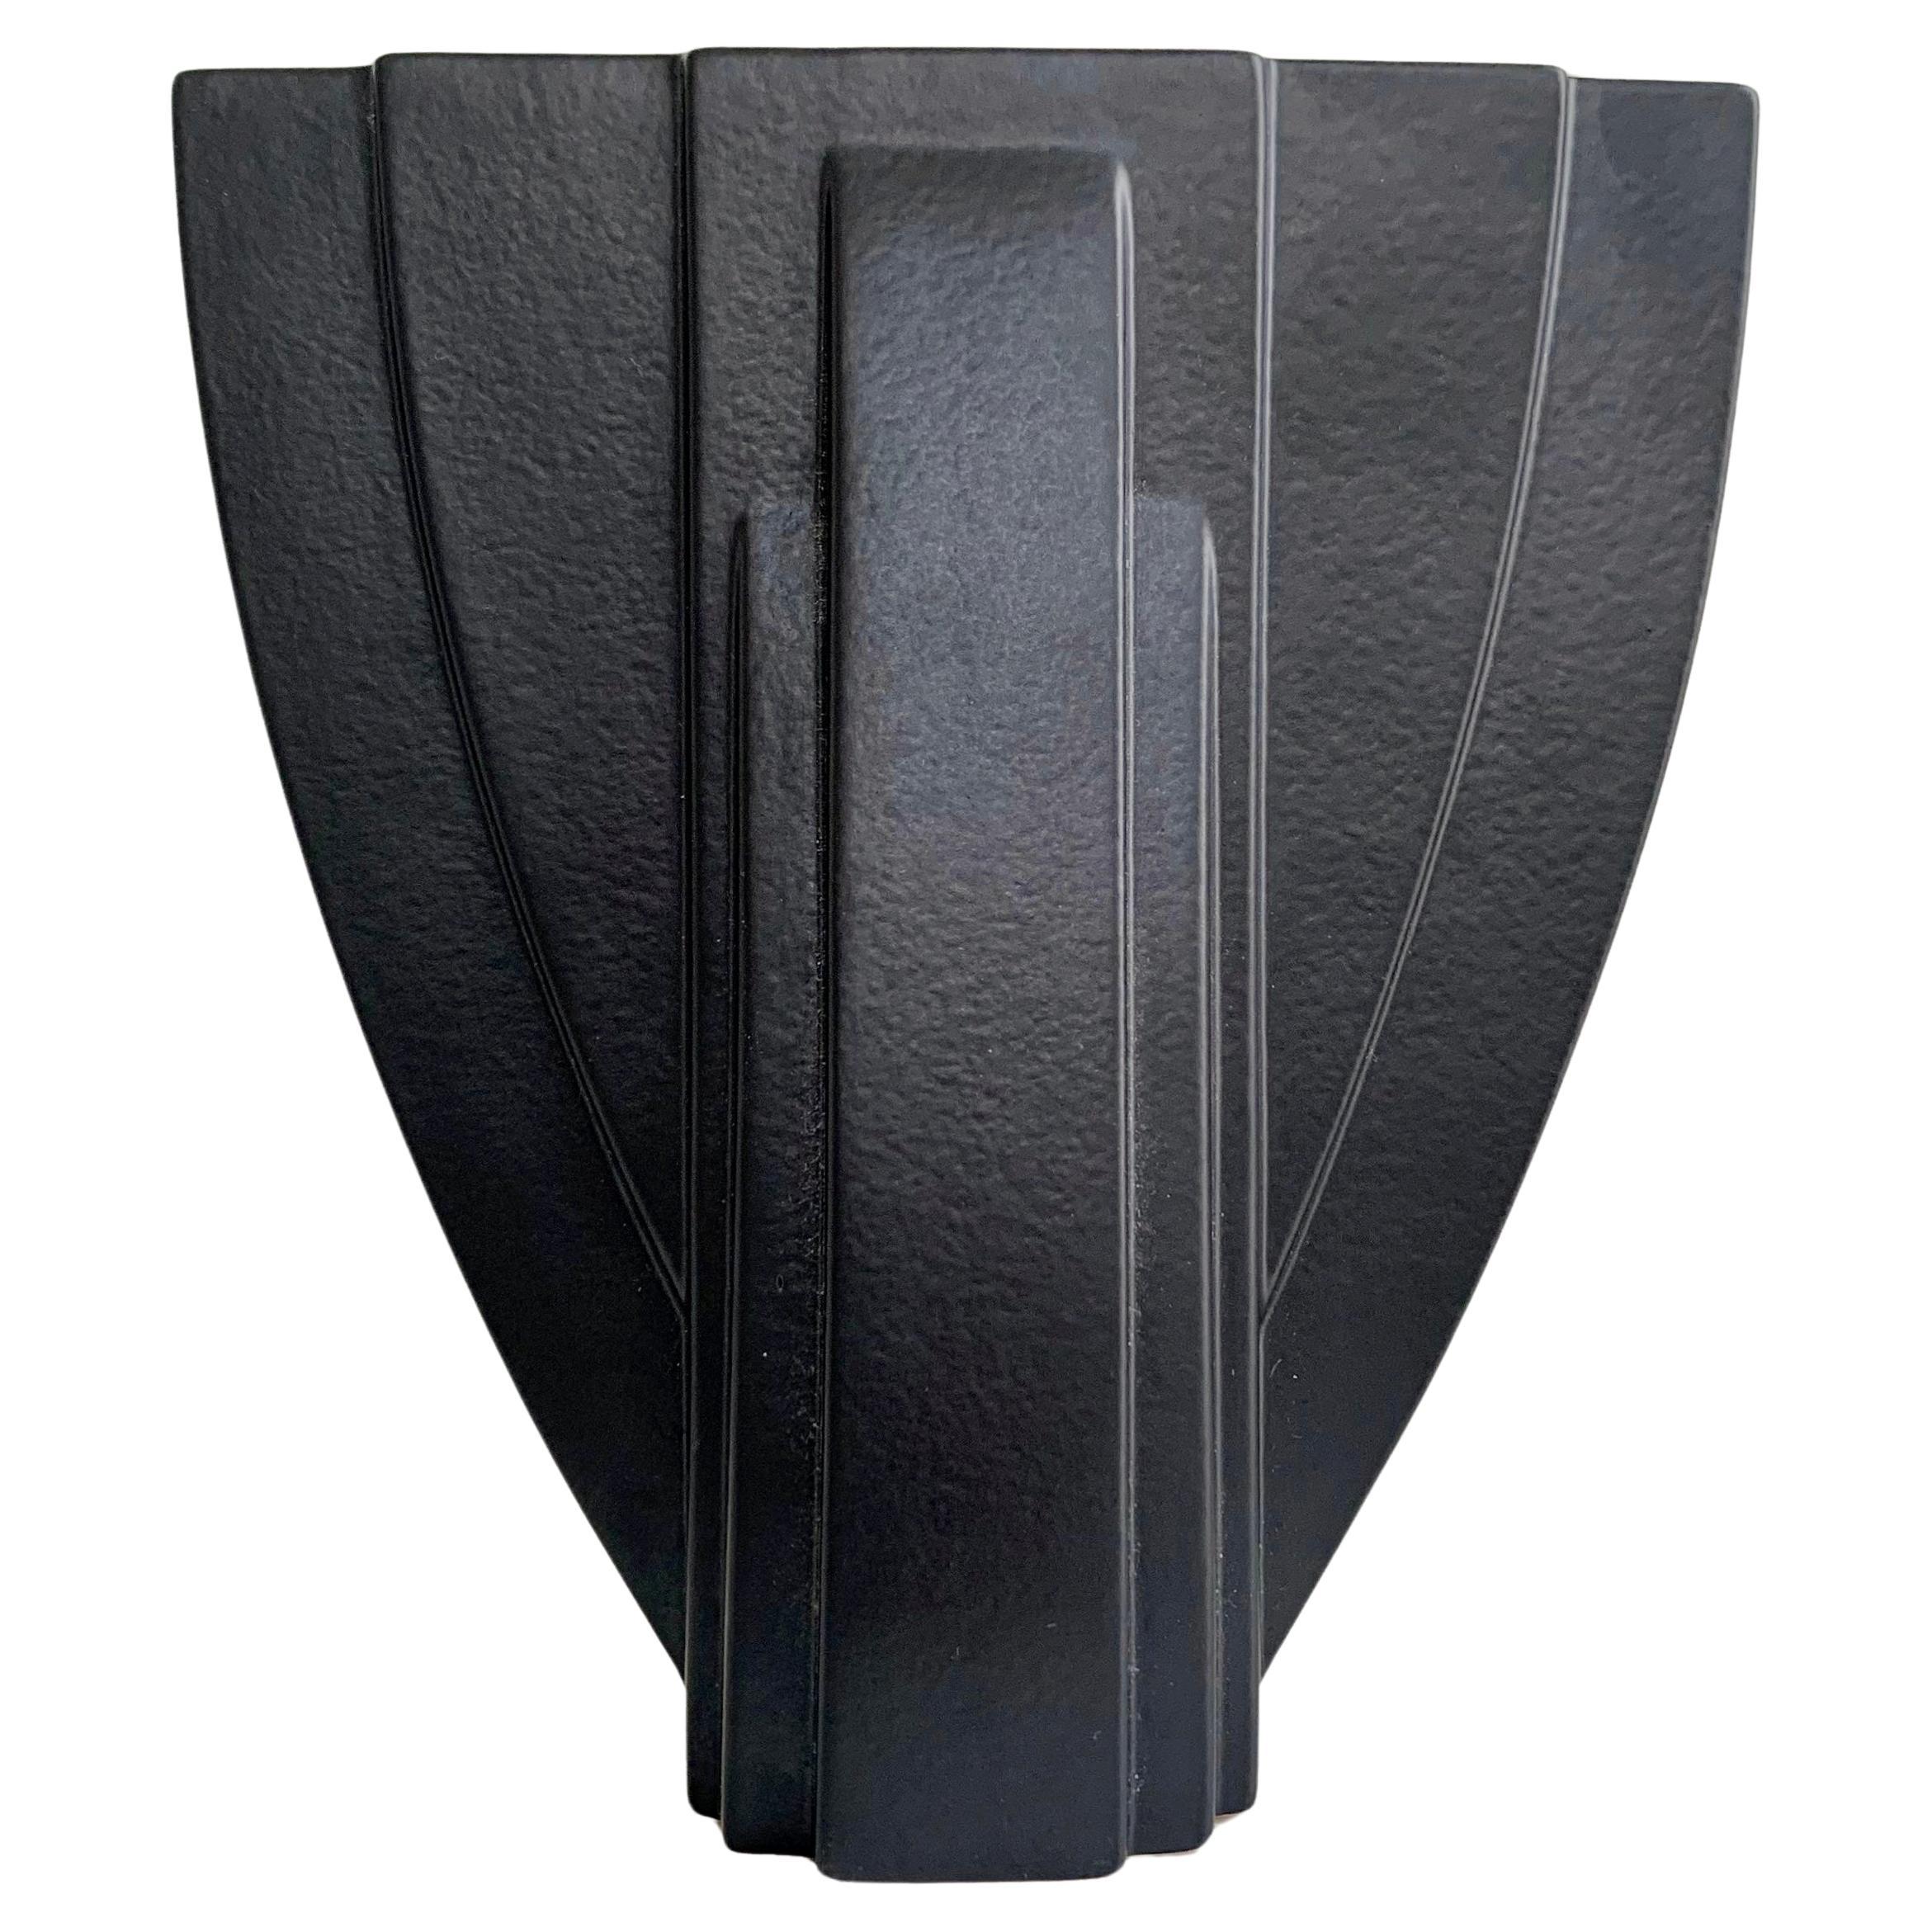 Vase Skyscraper model by Claude Dumas circa 1980, France.
Black ceramic.
Signed Claude Dumas Made in France underneath.
Dimensions: 20 cm H, 18 cm W, 9 cm D.
Good condition.
All purchases are covered by our Buyer Protection Guarantee.
This item can